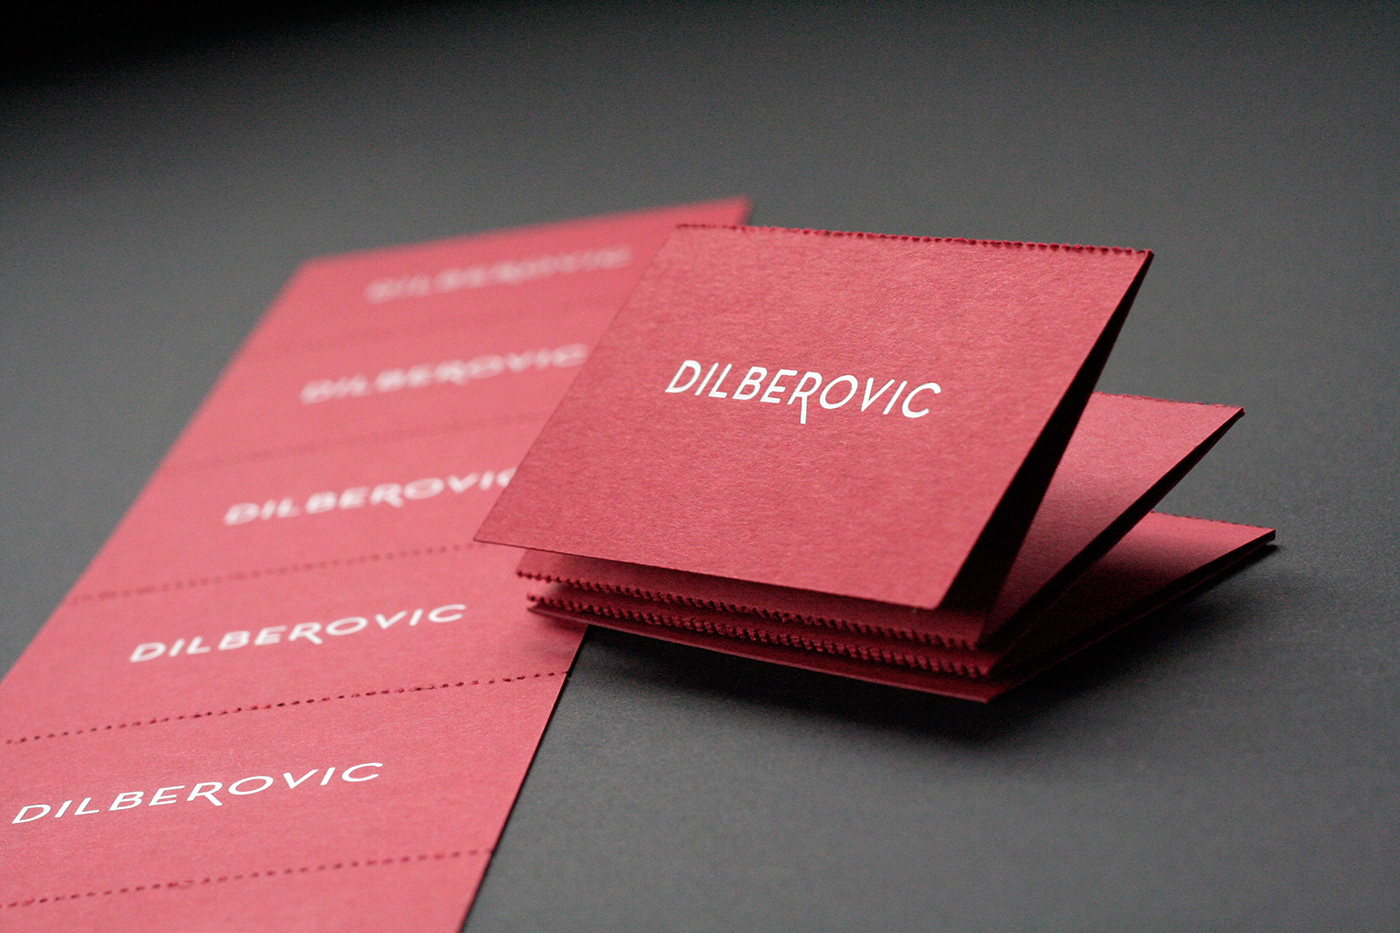 business card self service dilberovic ivan admit One perforated studio foil stamp card